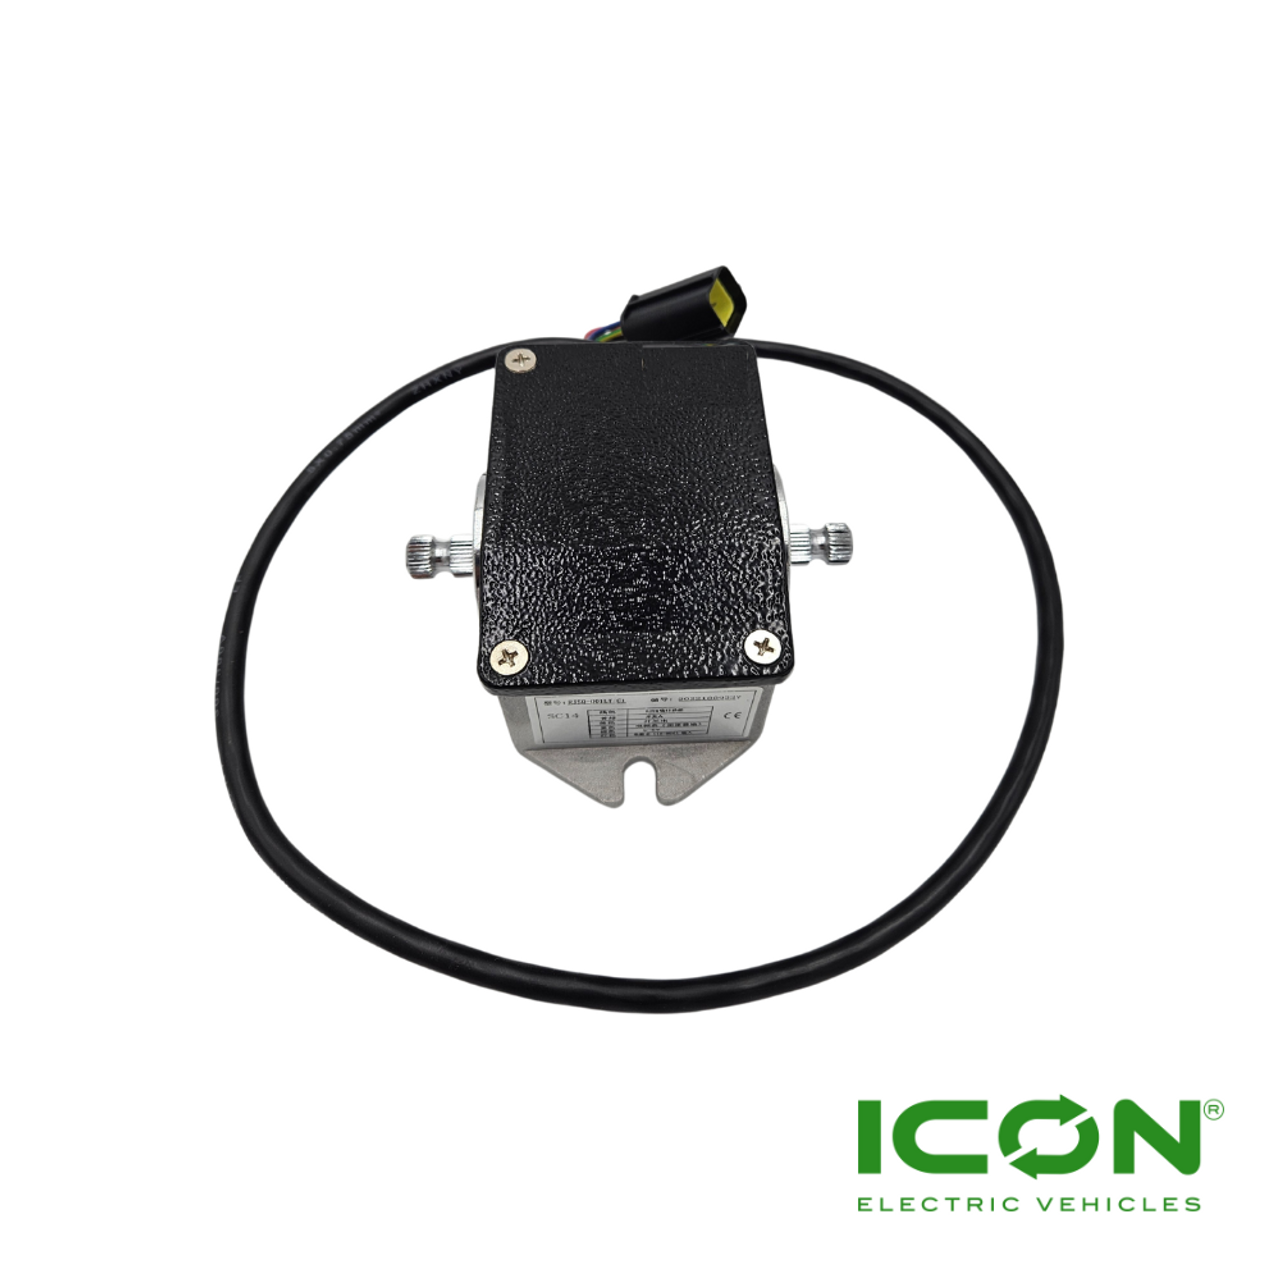 Accelerator Hall Pedal Switch for ICON Golf Cart, BRAK-654-IC, 3.03.005.000019, 3.202.05.000013